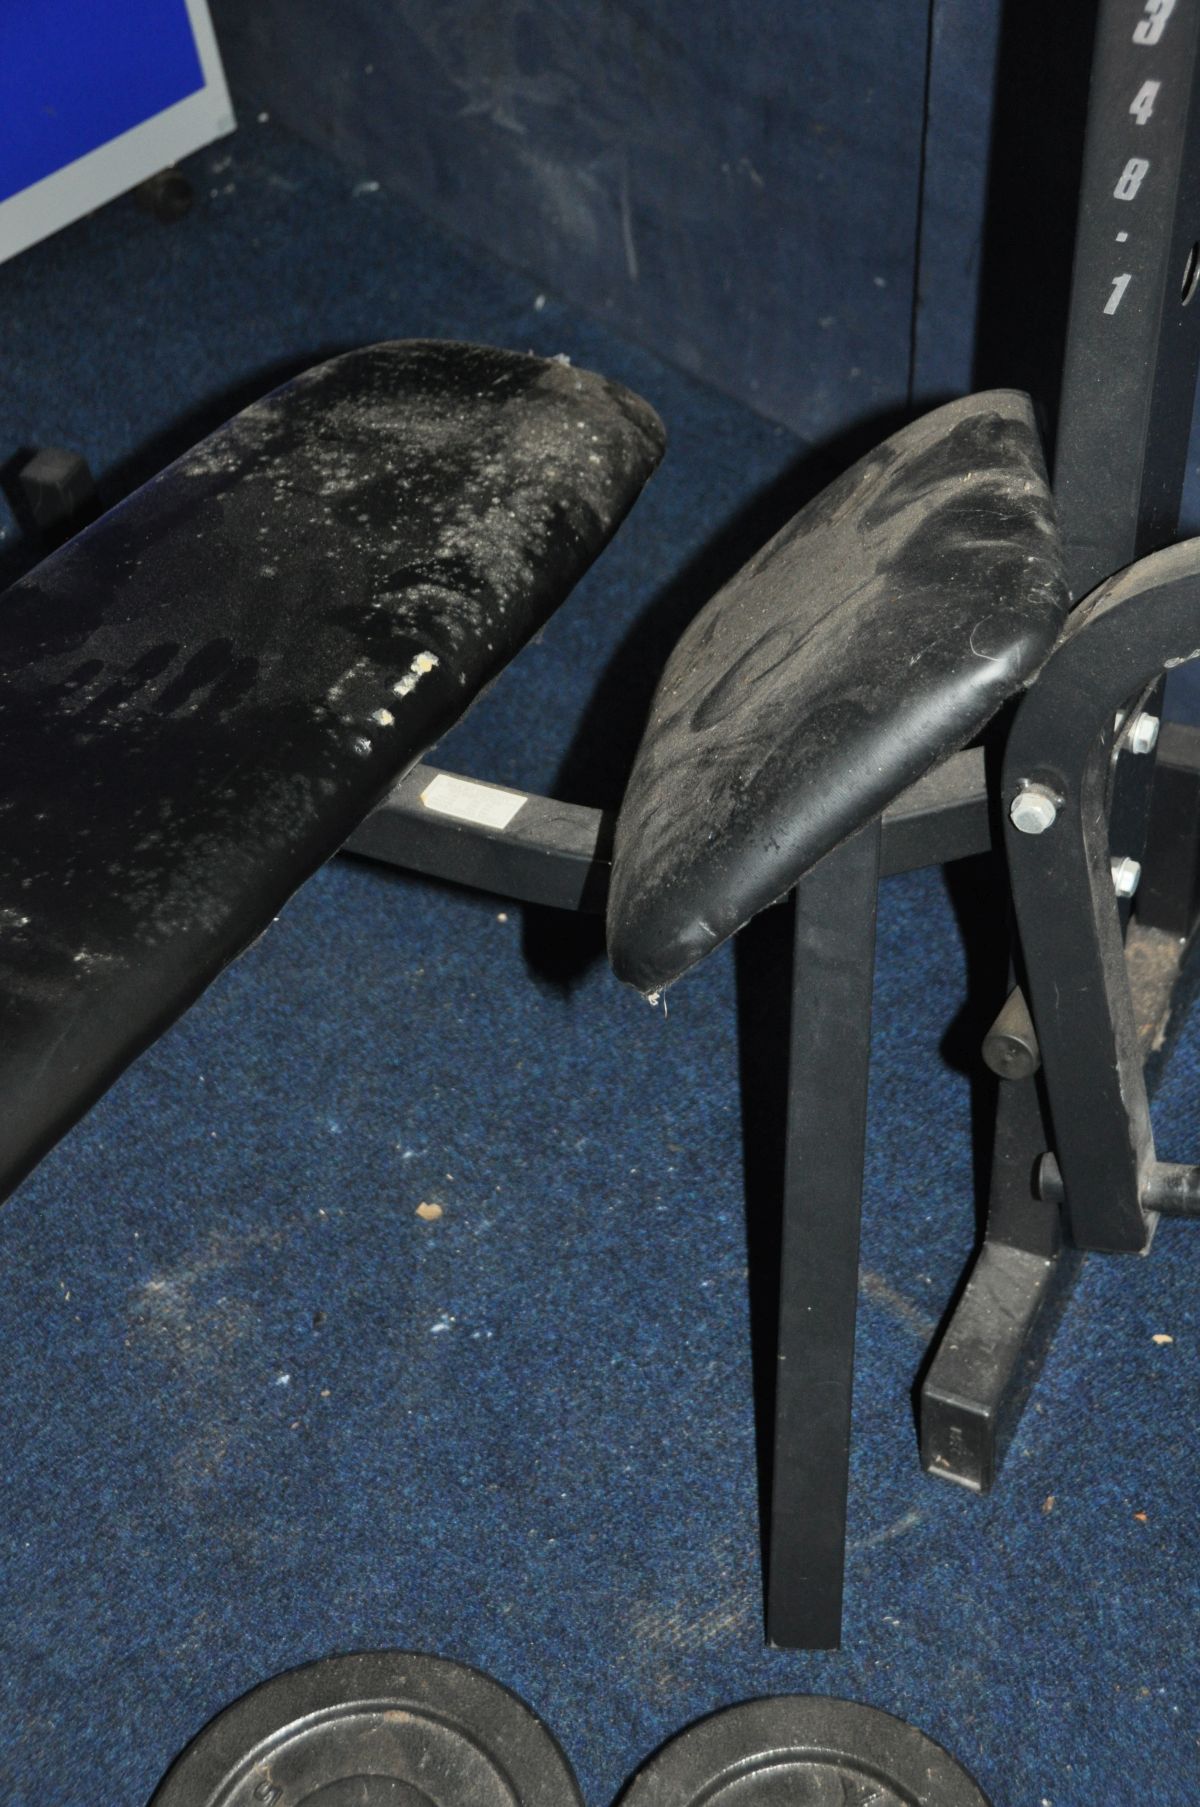 A MARCY WM348-1 WEIGHT BENCH with an Olympic bar, sixteen York Olympic Standard Barbells (2 at - Image 6 of 7